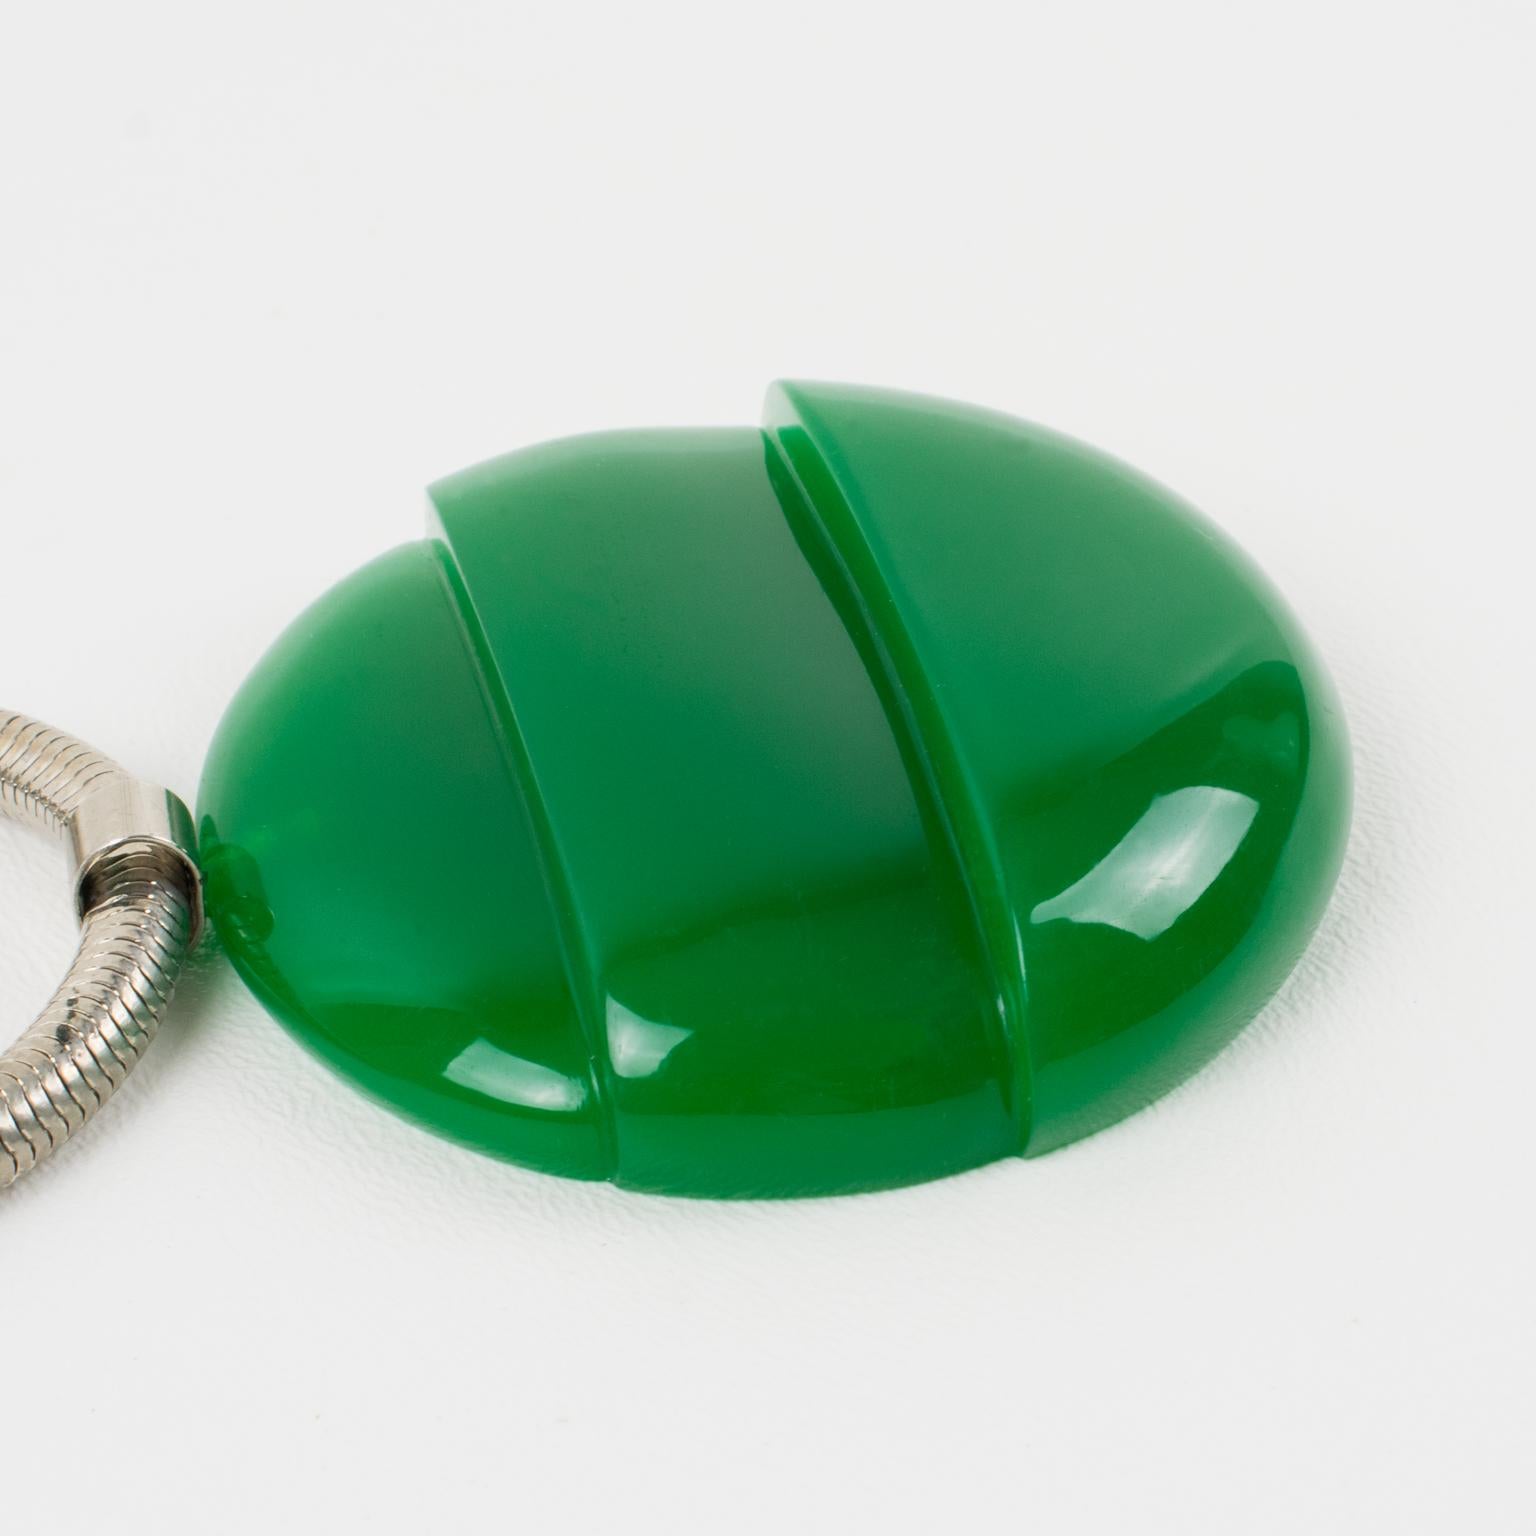 Lanvin Paris Modernist Green Lucite Medallion Necklace with Snake Chain, 1970s 1